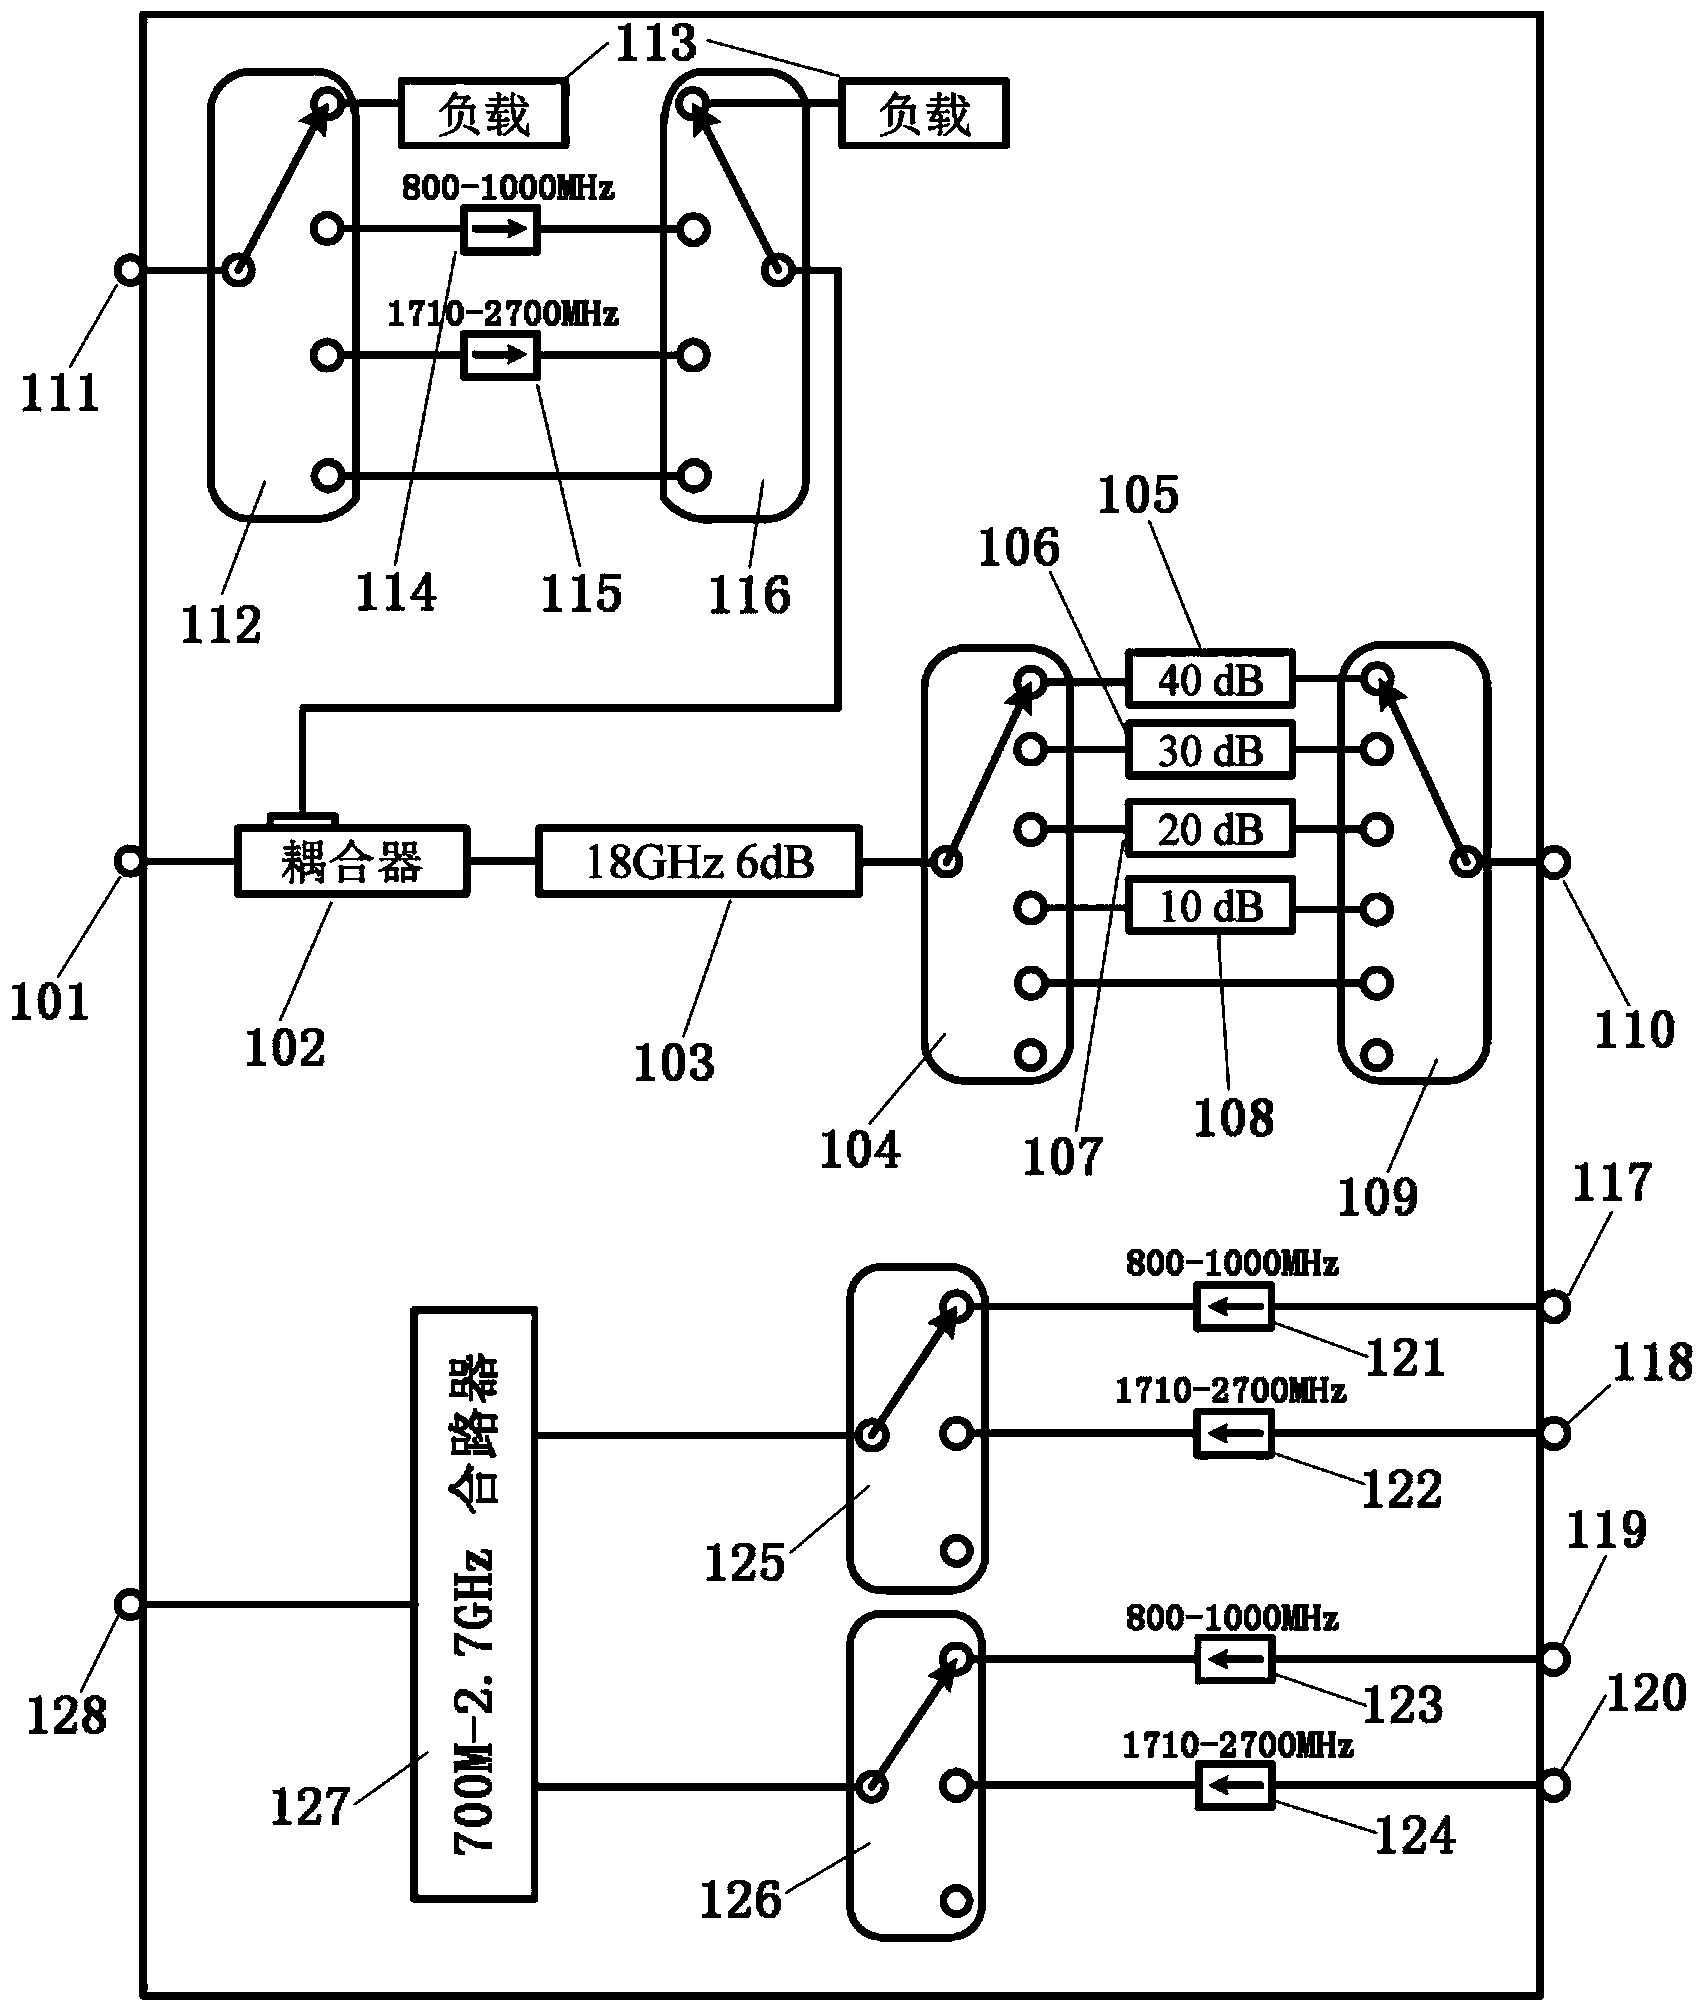 Base-station radio-frequency testing system applicable to LTE (Long Term Evolution) system and testing method